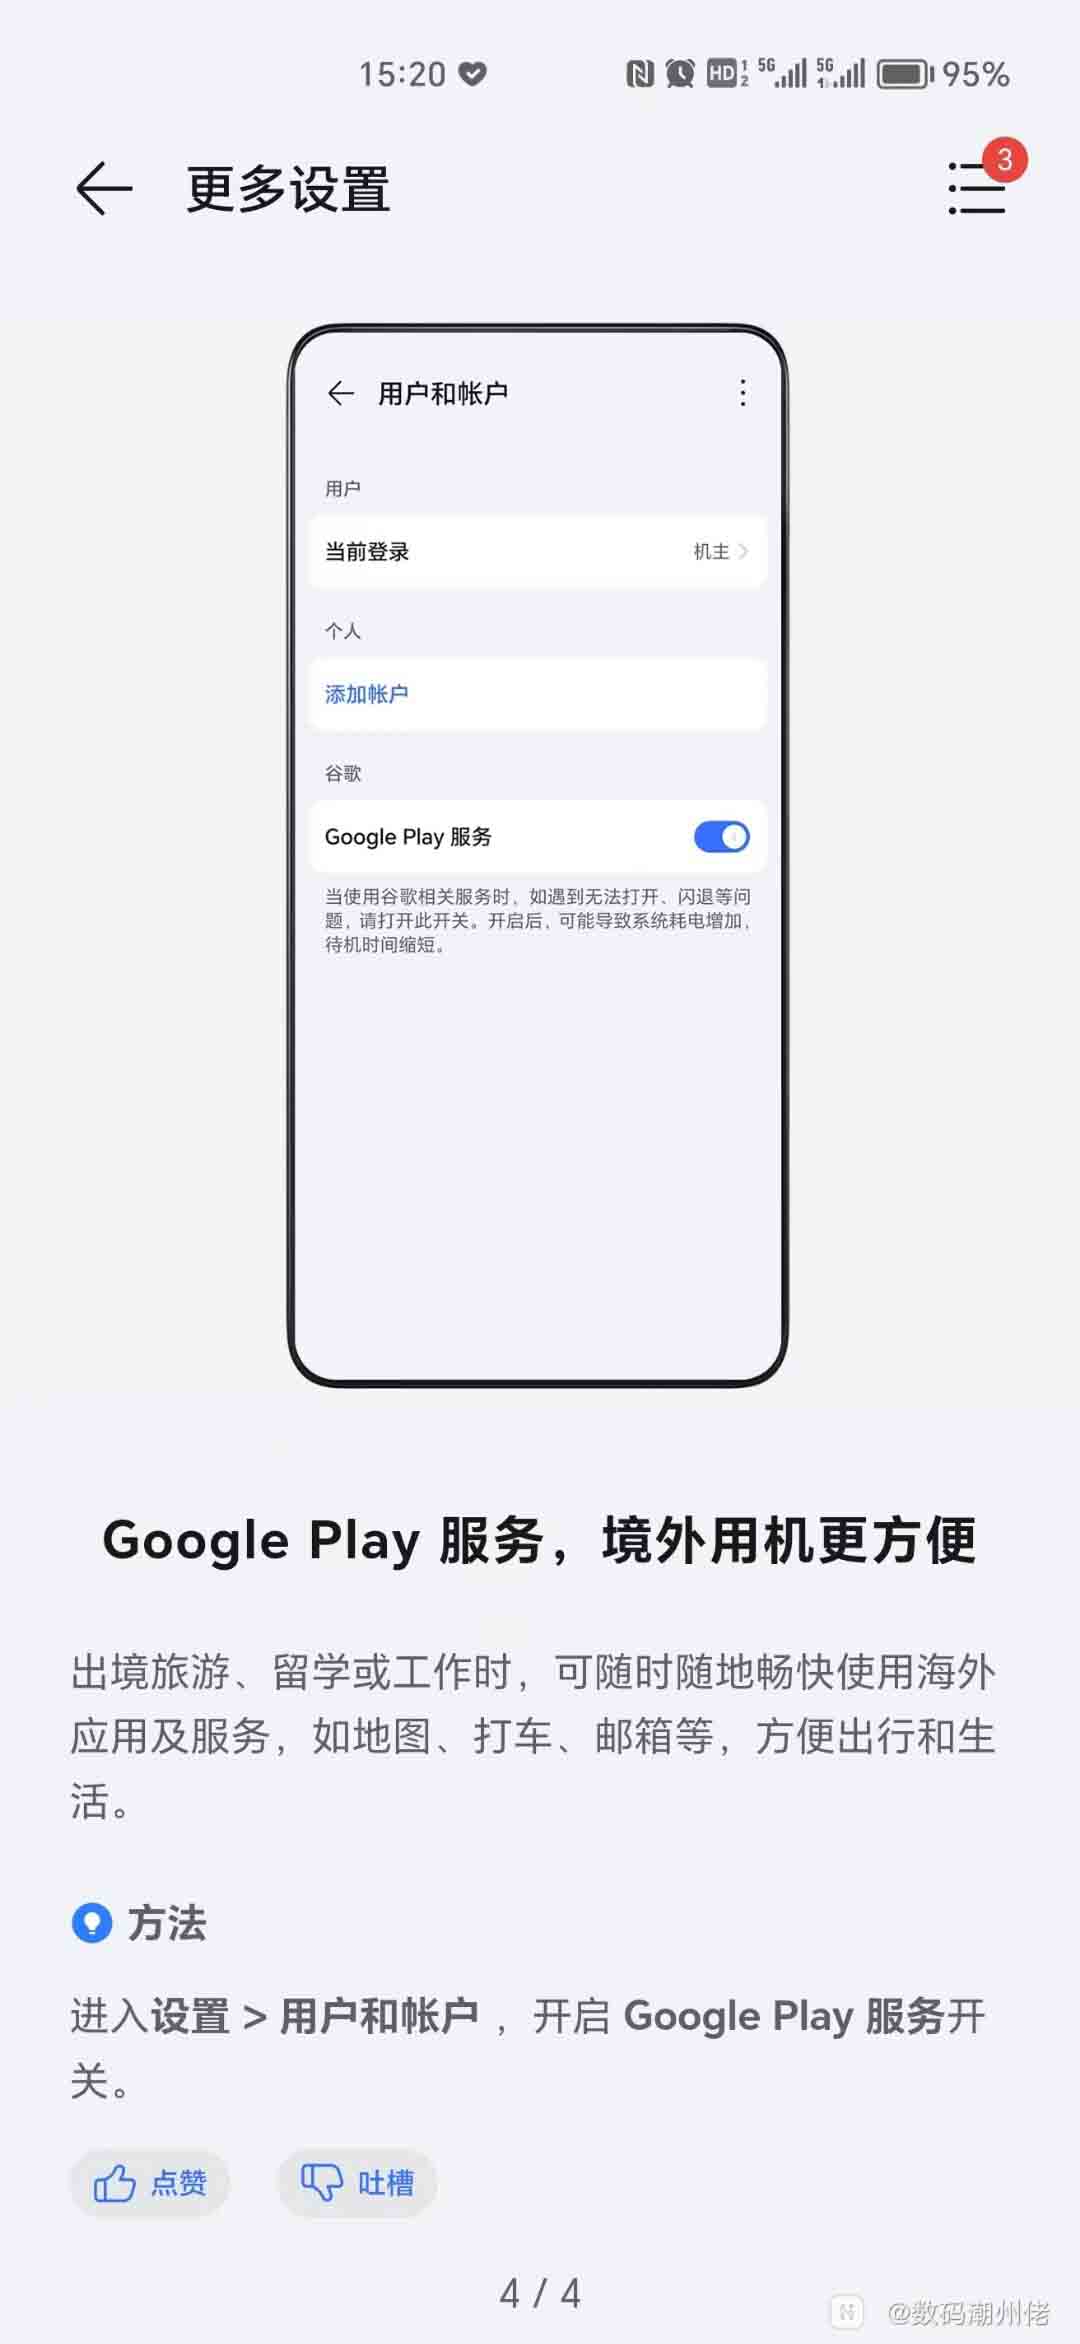 Honor Google Play services